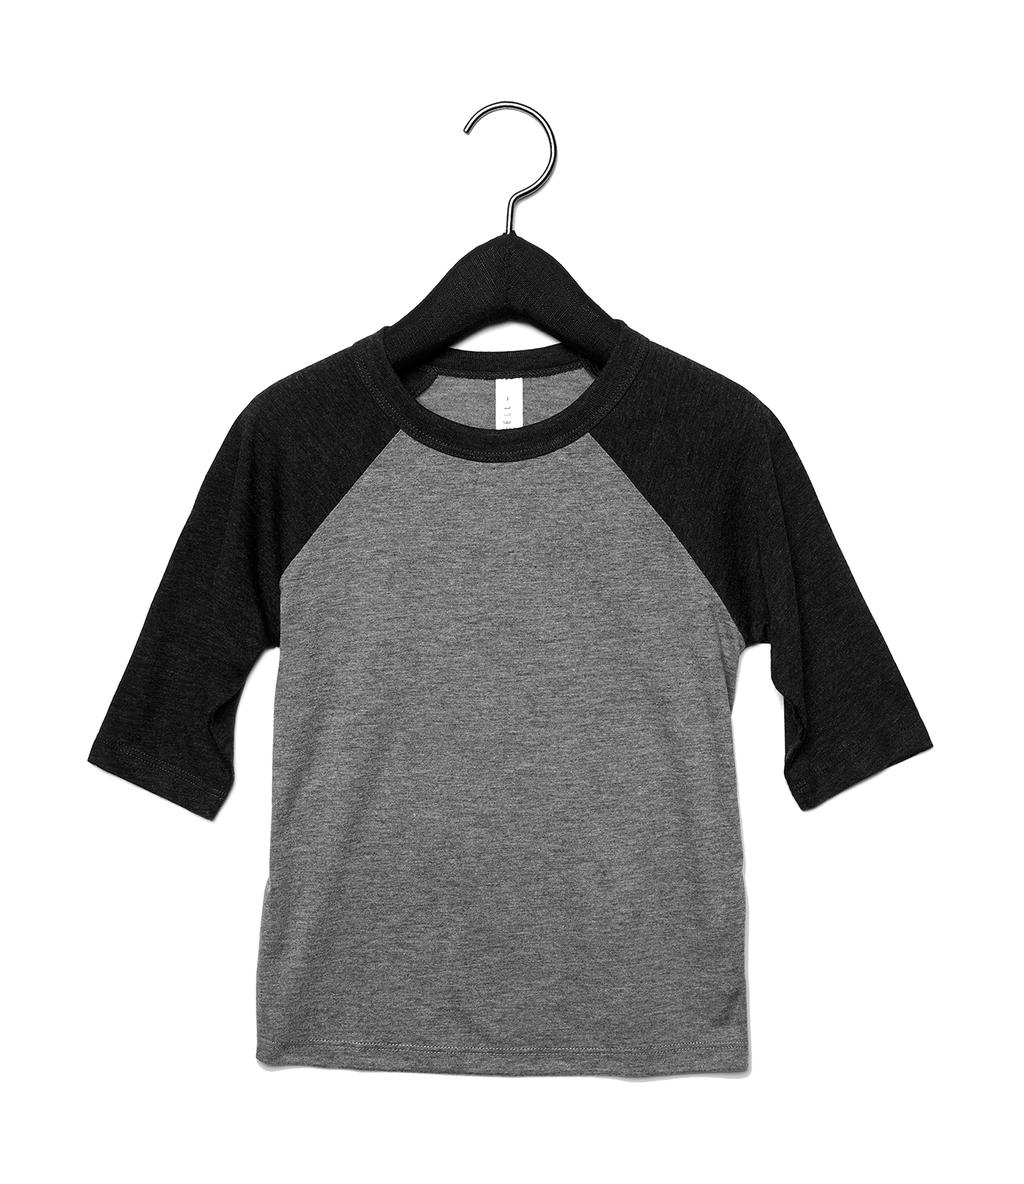  Toddler 3/4 Sleeve Baseball Tee in Farbe Grey/Charcoal-Black Triblend